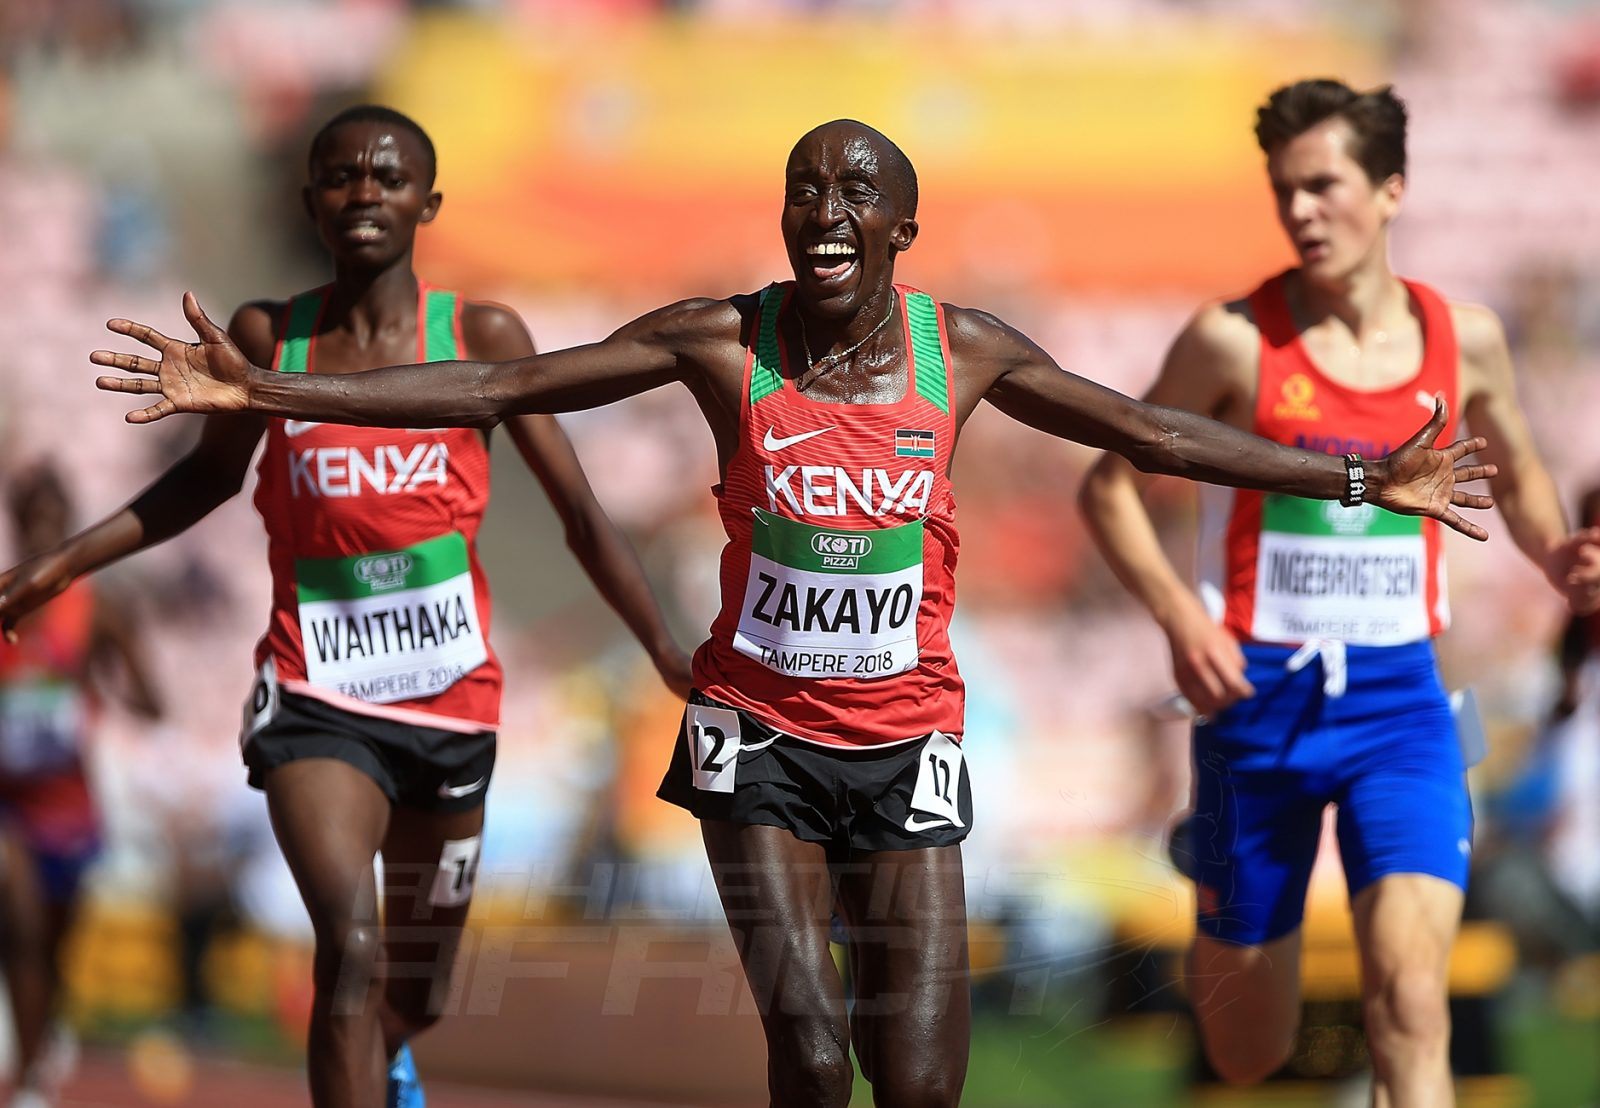 Edward Zakayo of Kenya wins the 5000m at the IAAF World U20 Championships Tampere 2018 / Photo Credit: Getty Images for IAAF